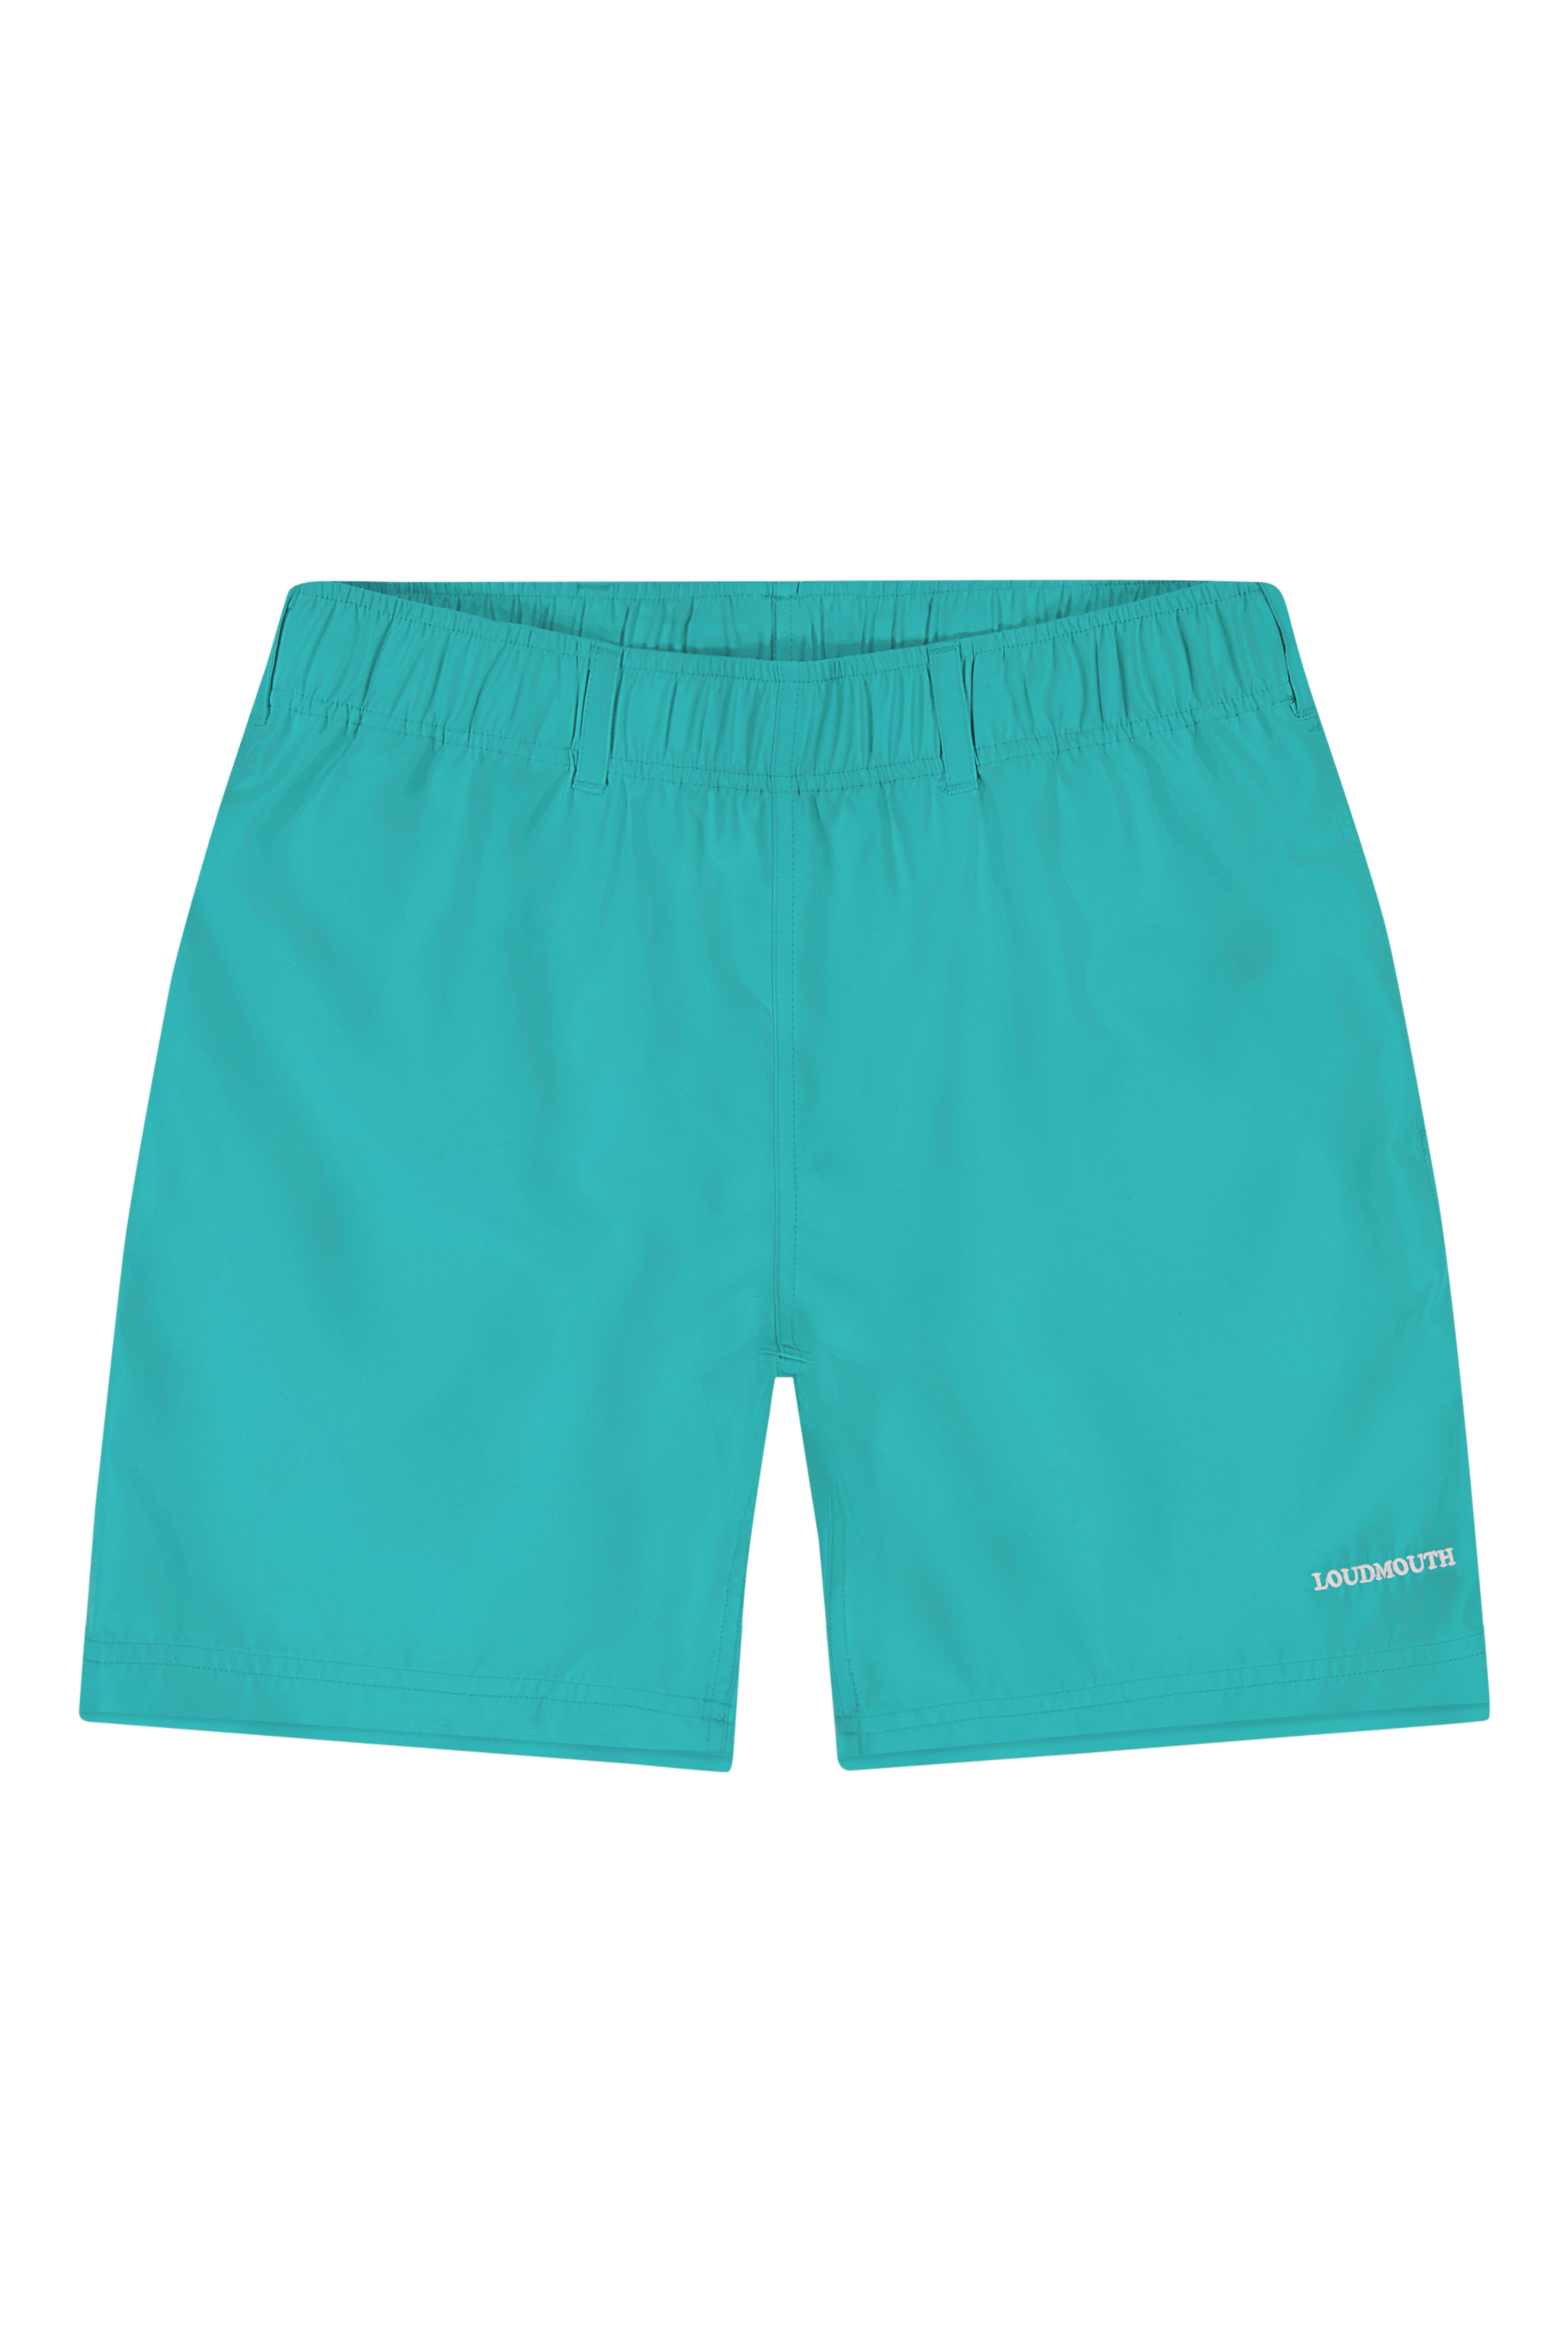 Anytime Short 2.0 - Teal